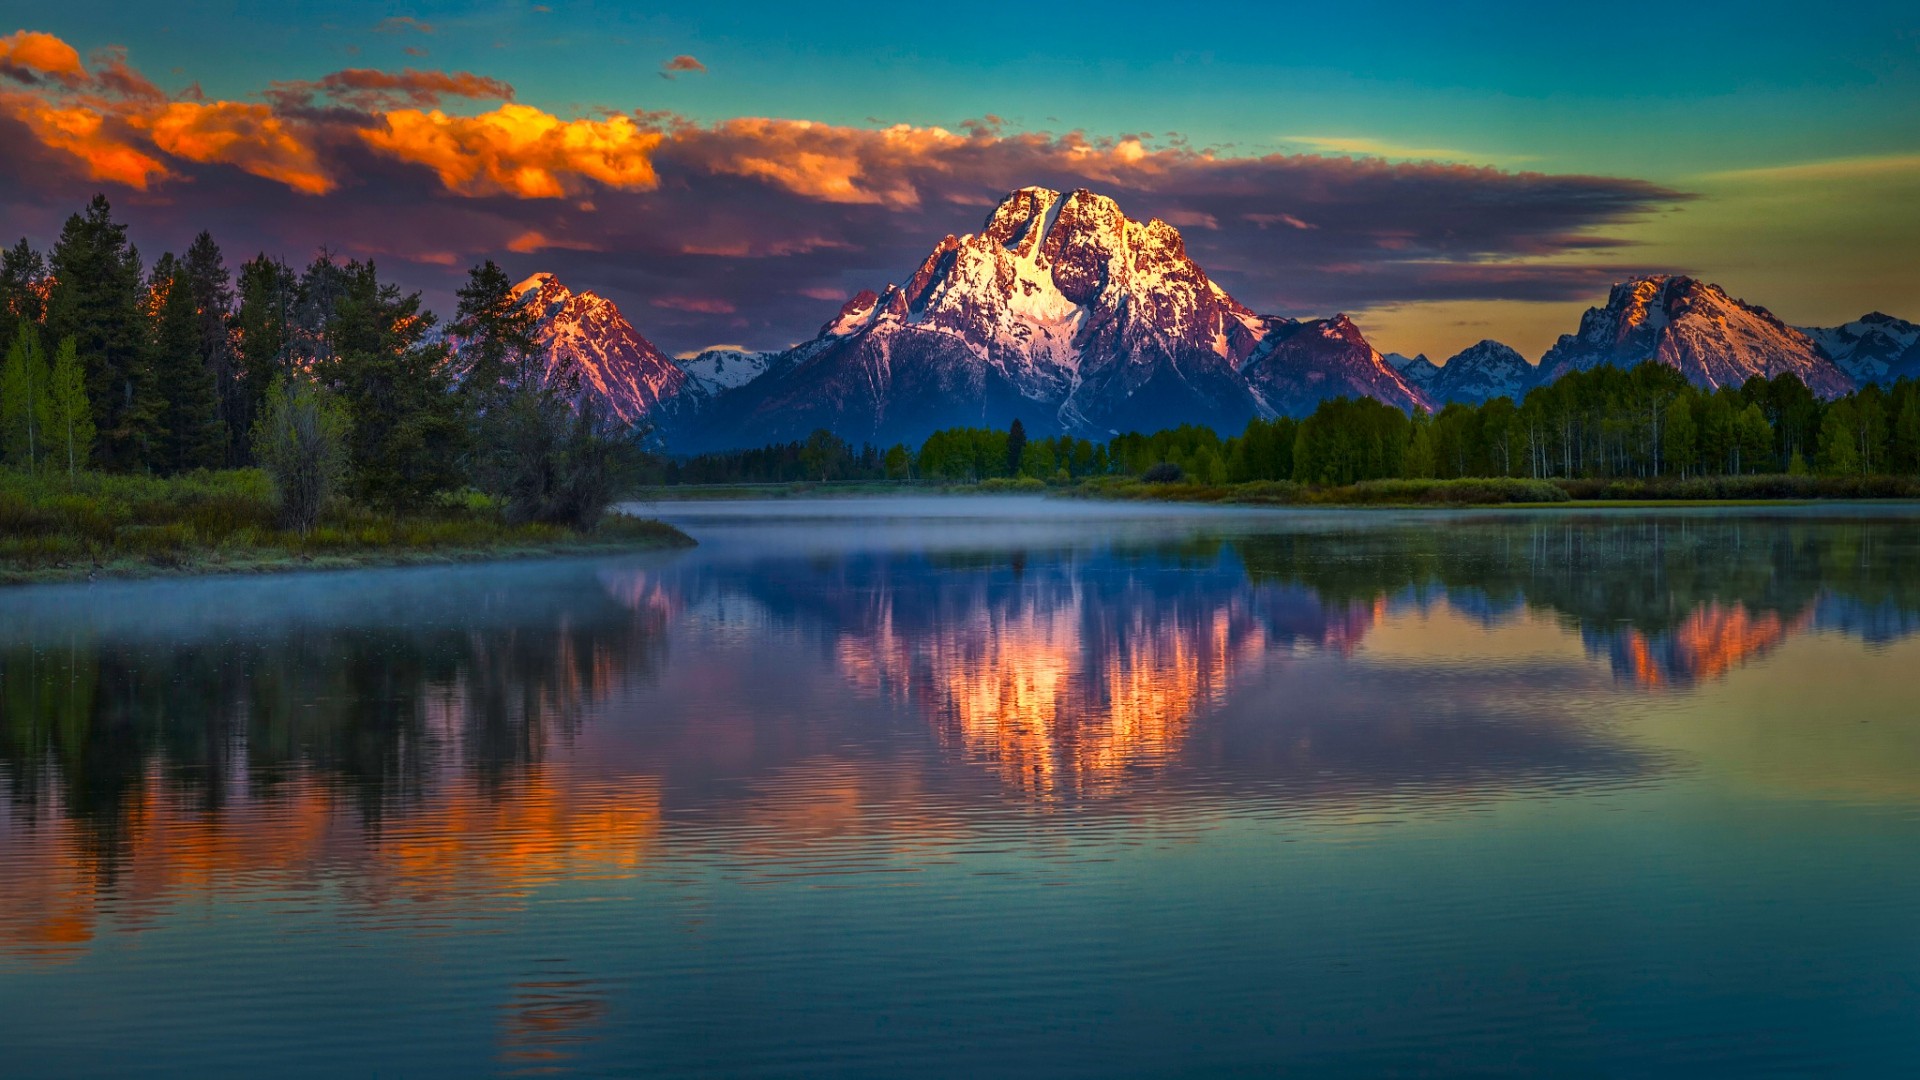 General 1920x1080 nature landscape mountains clouds snowy peak trees water lake mist morning Sun forest reflection Wyoming USA national park Grand Teton National Park